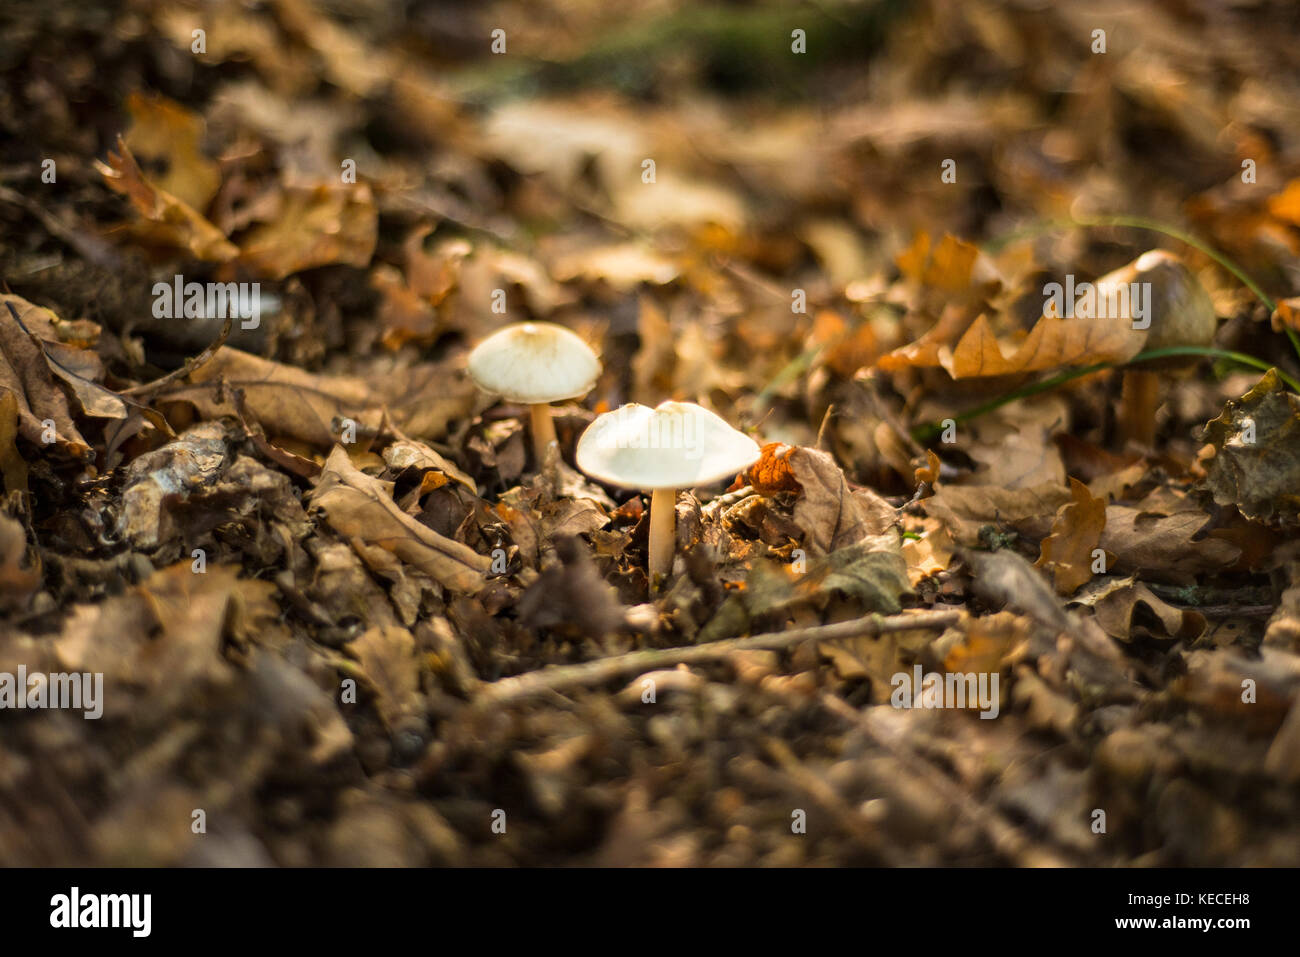 Small white mushrooms growing on the woodland floor with setting sunlight behind them, Woodland Landscape, Oxford, UK Stock Photo